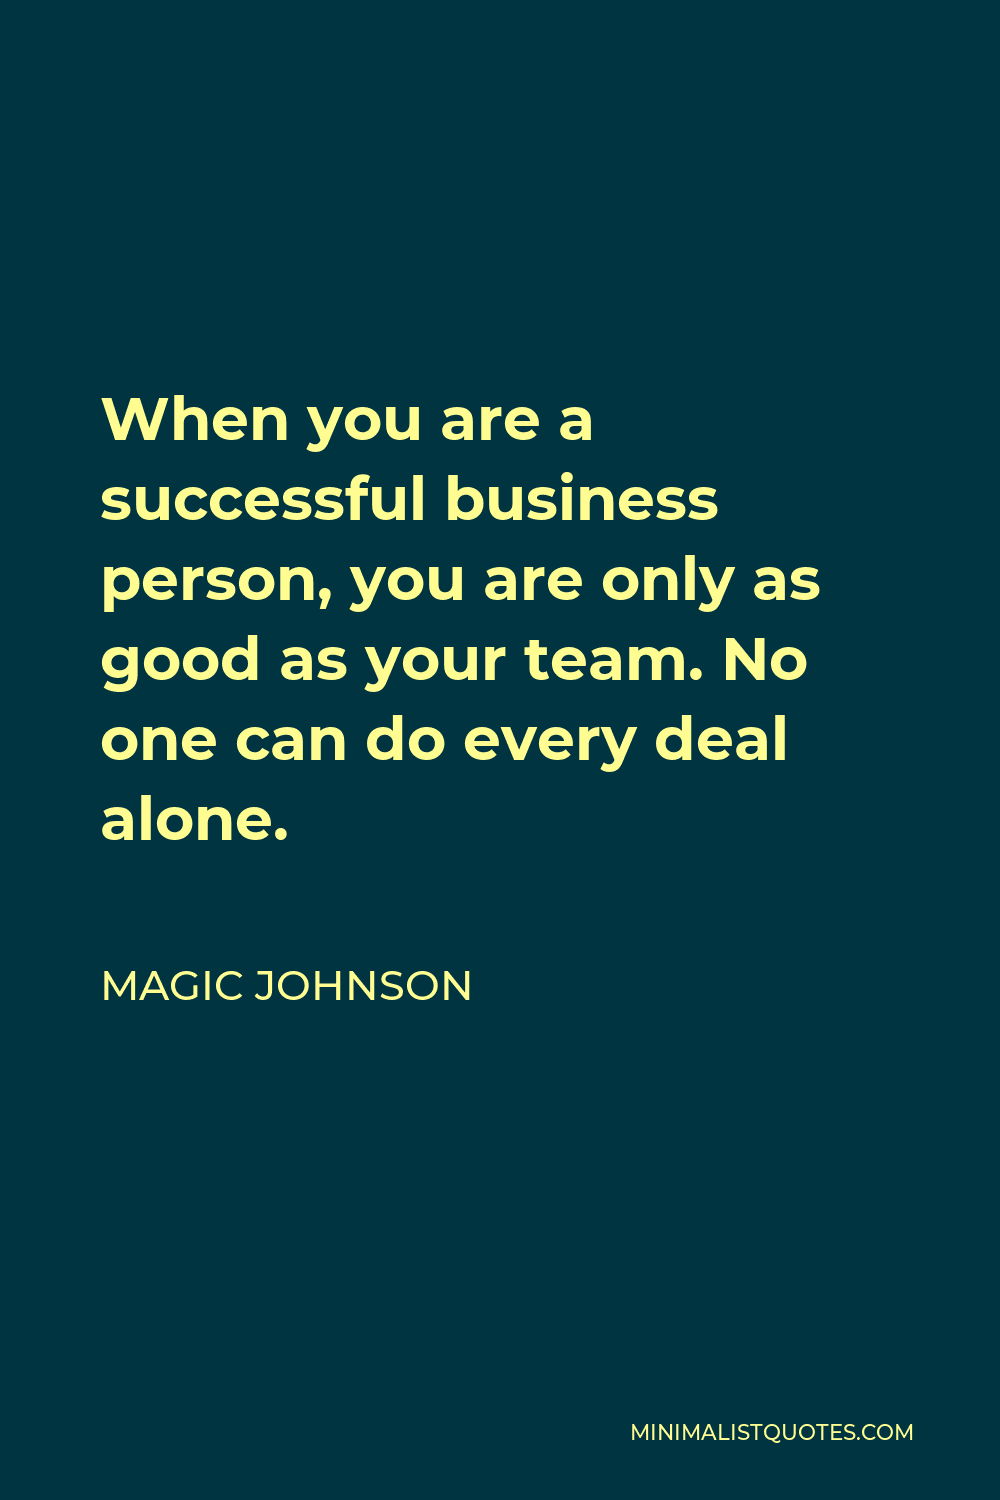 Magic Johnson Quote - When you are a successful business person, you are only as good as your team. No one can do every deal alone.